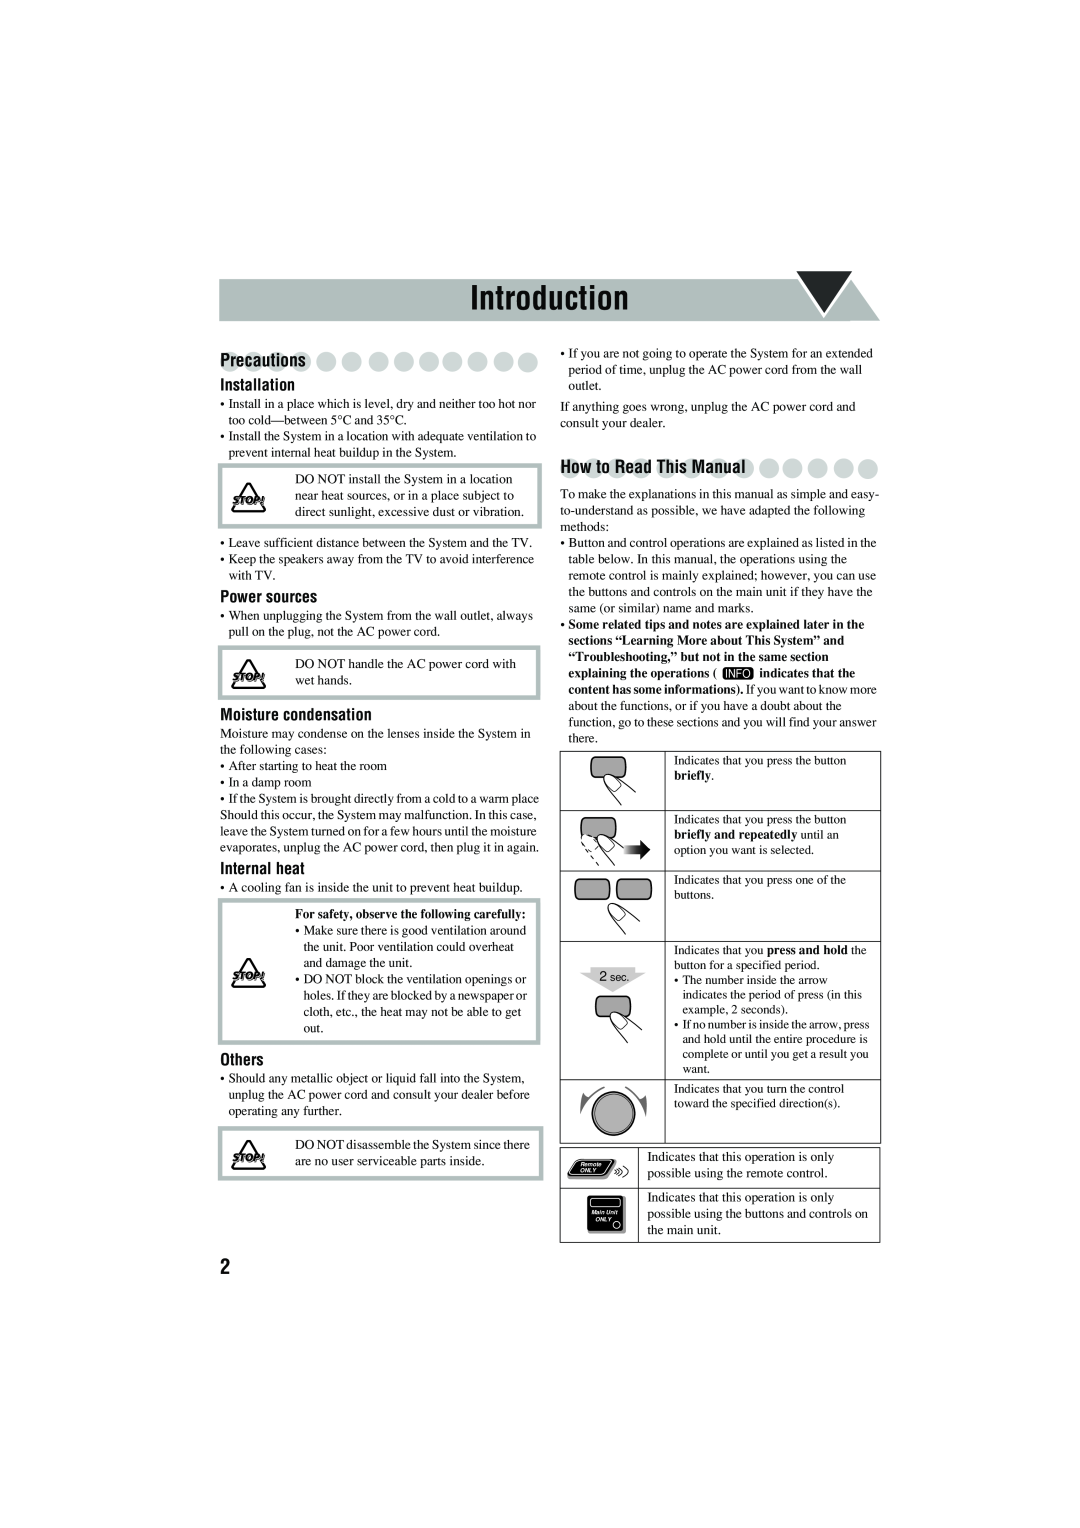 JVC CA-MXJD8 manual Introduction, Precautions, How to Read This Manual, Installation, Power sources, Moisture condensation 